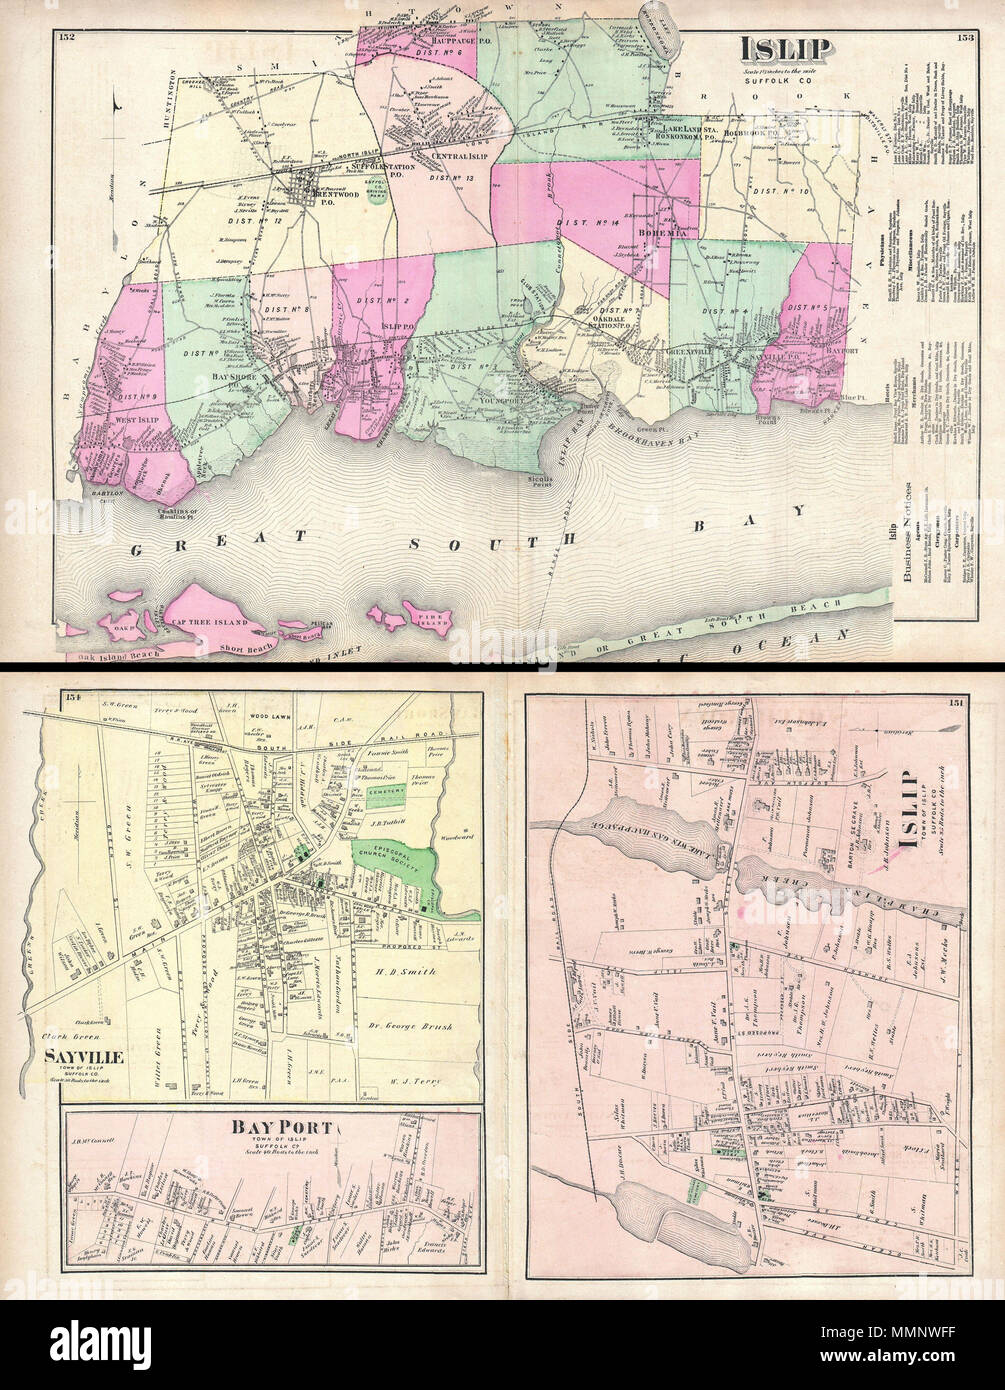 .  English: A scarce example of Fredrick W. Beers’ map of the Islip and Sayville, Long Island, New York. Published in 1873. Islip side covers from Babylon Cove and West Islip eastward past Bay Shore, Islip, young Point, Oakdale, Greenville to Sayville and Bayport. Includes parts of Oak Island and Fire Island. Notations to the right of the map proper offer business notices. On the verso, sheet is divided into three town plans. These include Islip, Sayville and Bayport. Detailed to the street and building level with notations on individual property owners. This is probably the finest atlas map o Stock Photo